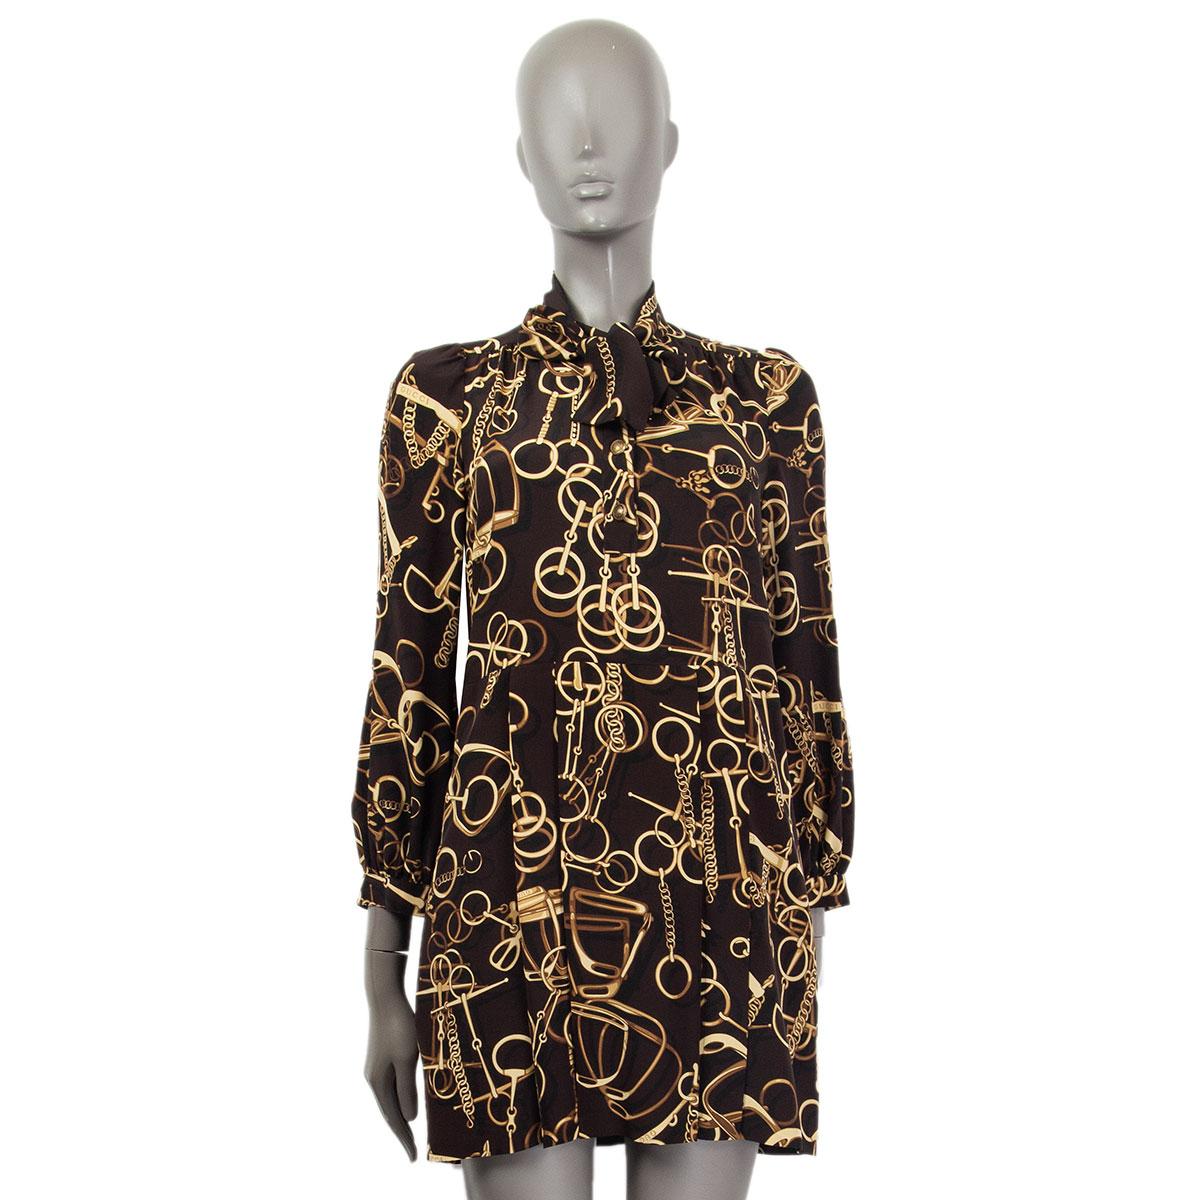 100% authentic Gucci pussy-bow pleated longsleeve dress in brown and beige horsebit and stirrup printed dress in silk (100%). Has four embossed antique gold-tone metal buttons at front and two side slit pockets. Has been worn and is in excellent